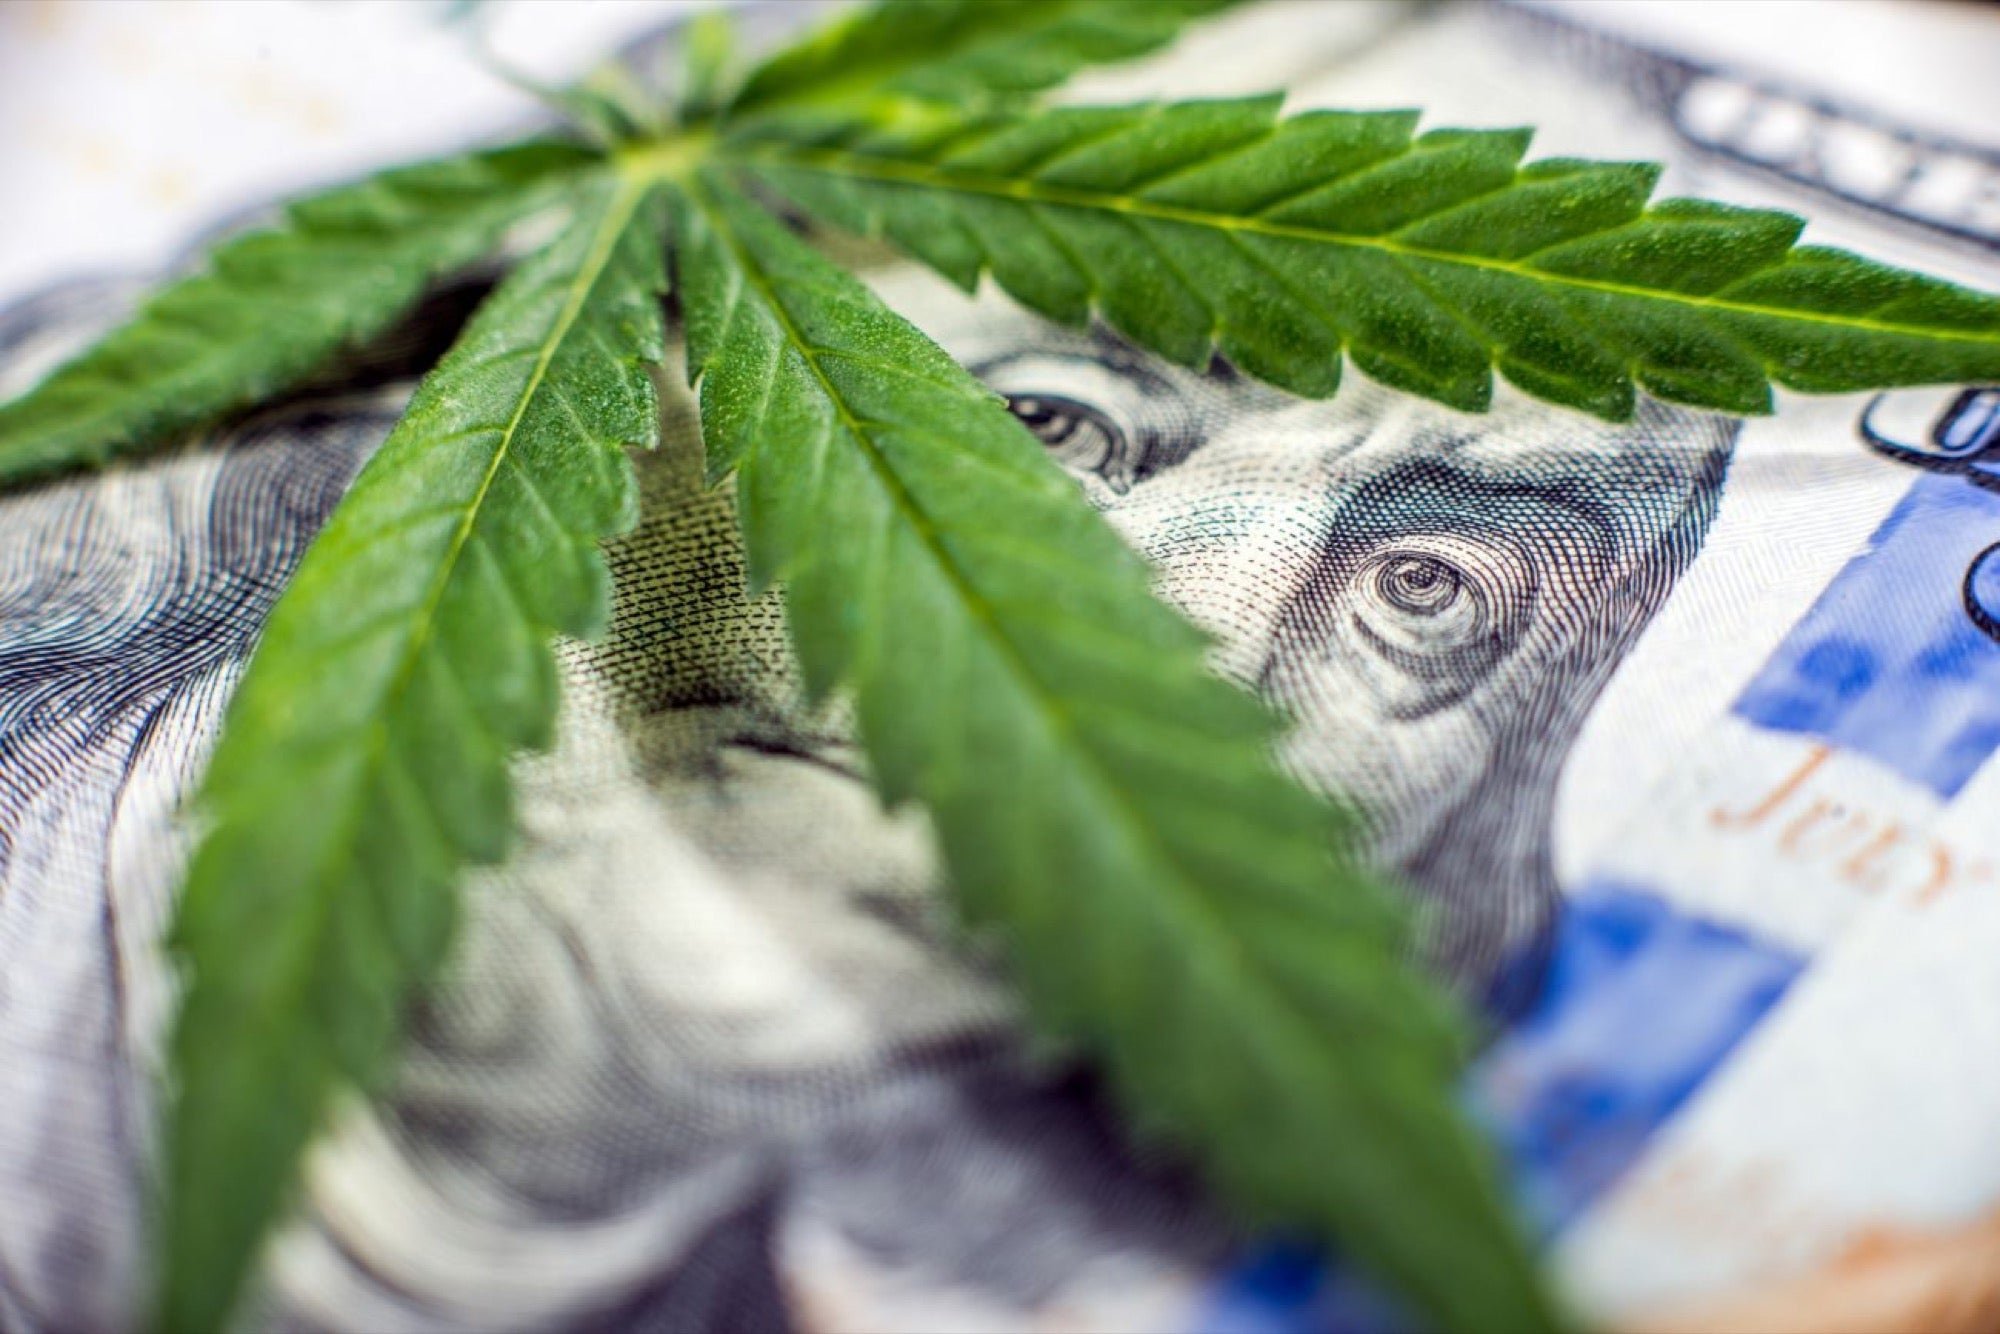 How to Start a Cannabis Business